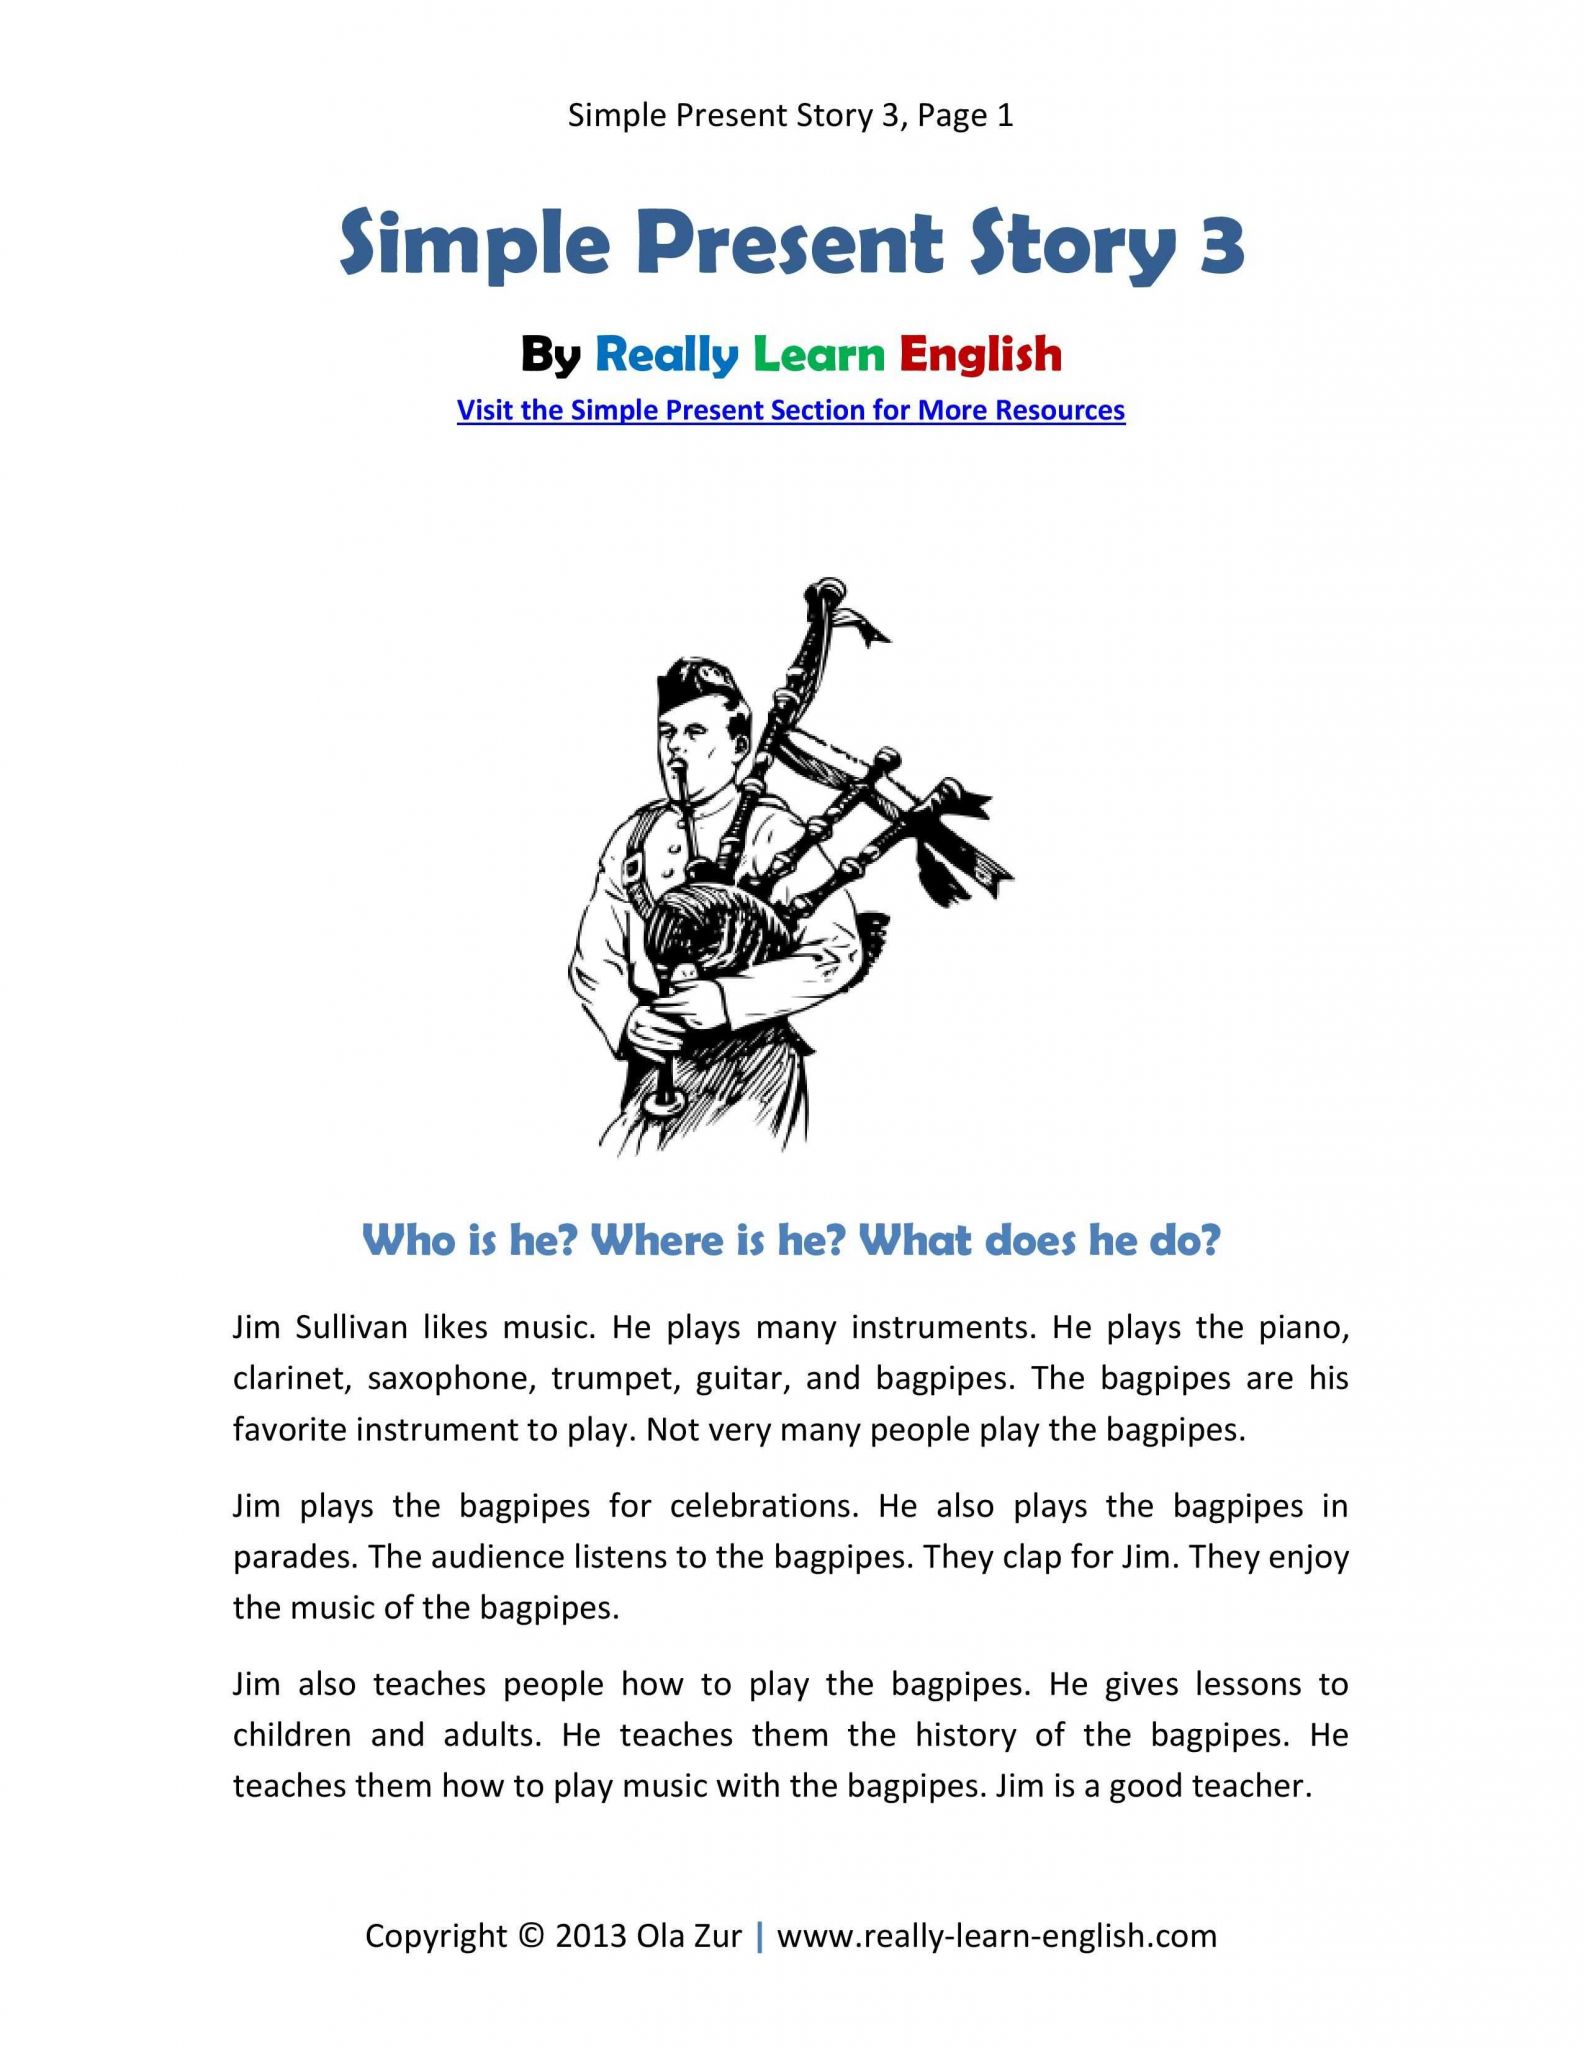 Progressive Era Review Worksheet Answers as Well as Practice the English Simple Present Tense with This Printable Story